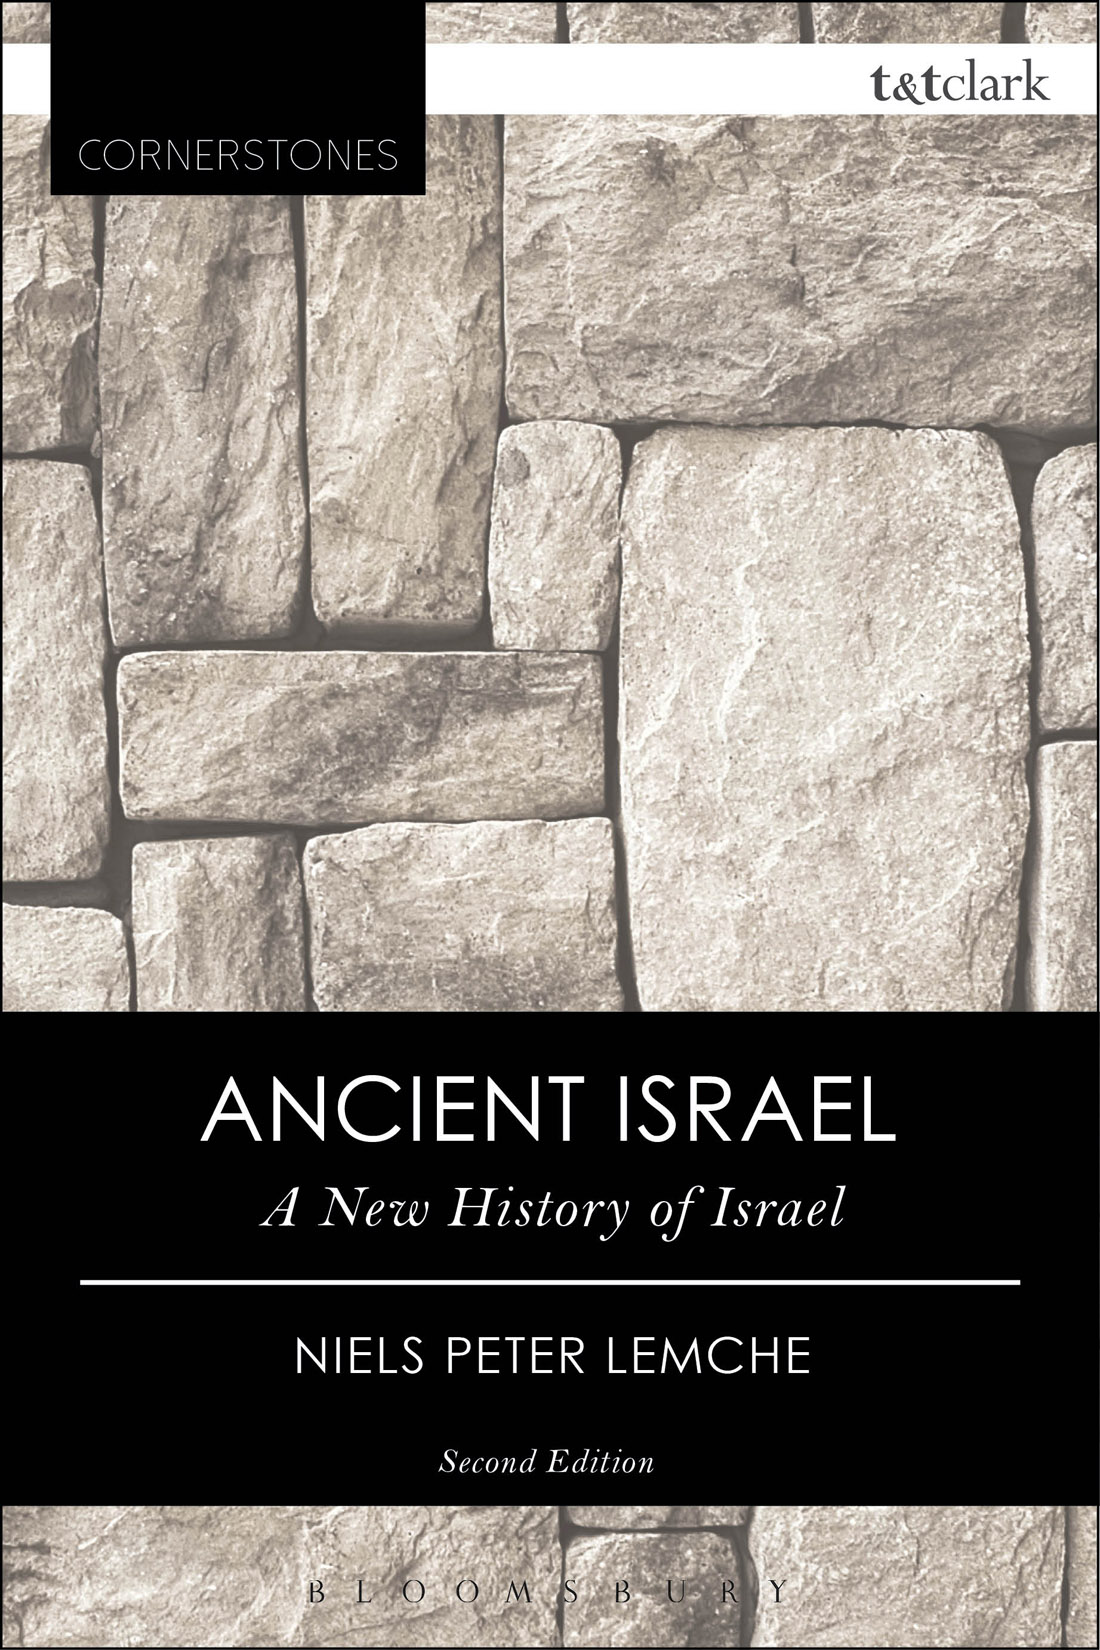 Ancient Israel Other Titles in the Cornerstones Series The Israelite Woman by - photo 1